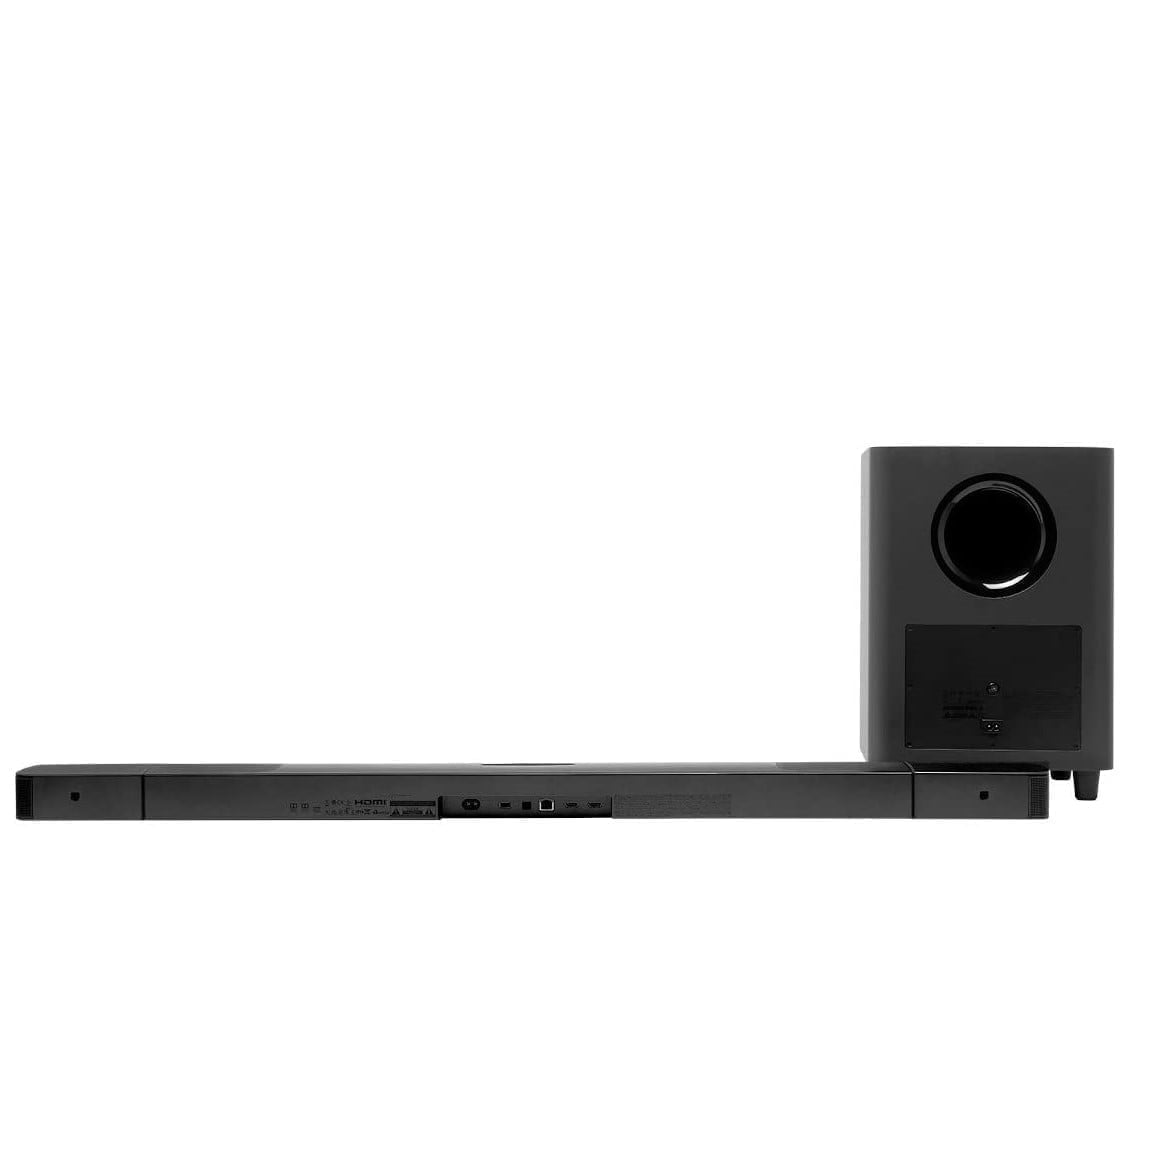 Jbl &Lt;H1&Gt;Jbl Bar 9.1 True Wireless Surround With Dolby Atmos&Lt;/H1&Gt; Https://Www.youtube.com/Watch?V=Wqyzdx2-Nne Upgrade Your Home Theater With This Jbl Bar 9.1-Channel Jbl Soundbar System. The Powerful 820W Output Offers An Immersive Movie And Music Experience, While Bluetooth, Airplay 2 And Chromecast Connectivity Lets You Stream Audio Smoothly. This Jbl Bar 9.1-Channel Soundbar System Has Detachable Speakers With Rechargeable Batteries For Flexible Placement, And Dolby Atmos Technology Delivers Quality Surround Sound. Jbl Soundbar Jbl Bar 9.1 True Wireless Surround With Dolby Atmos Soundbar